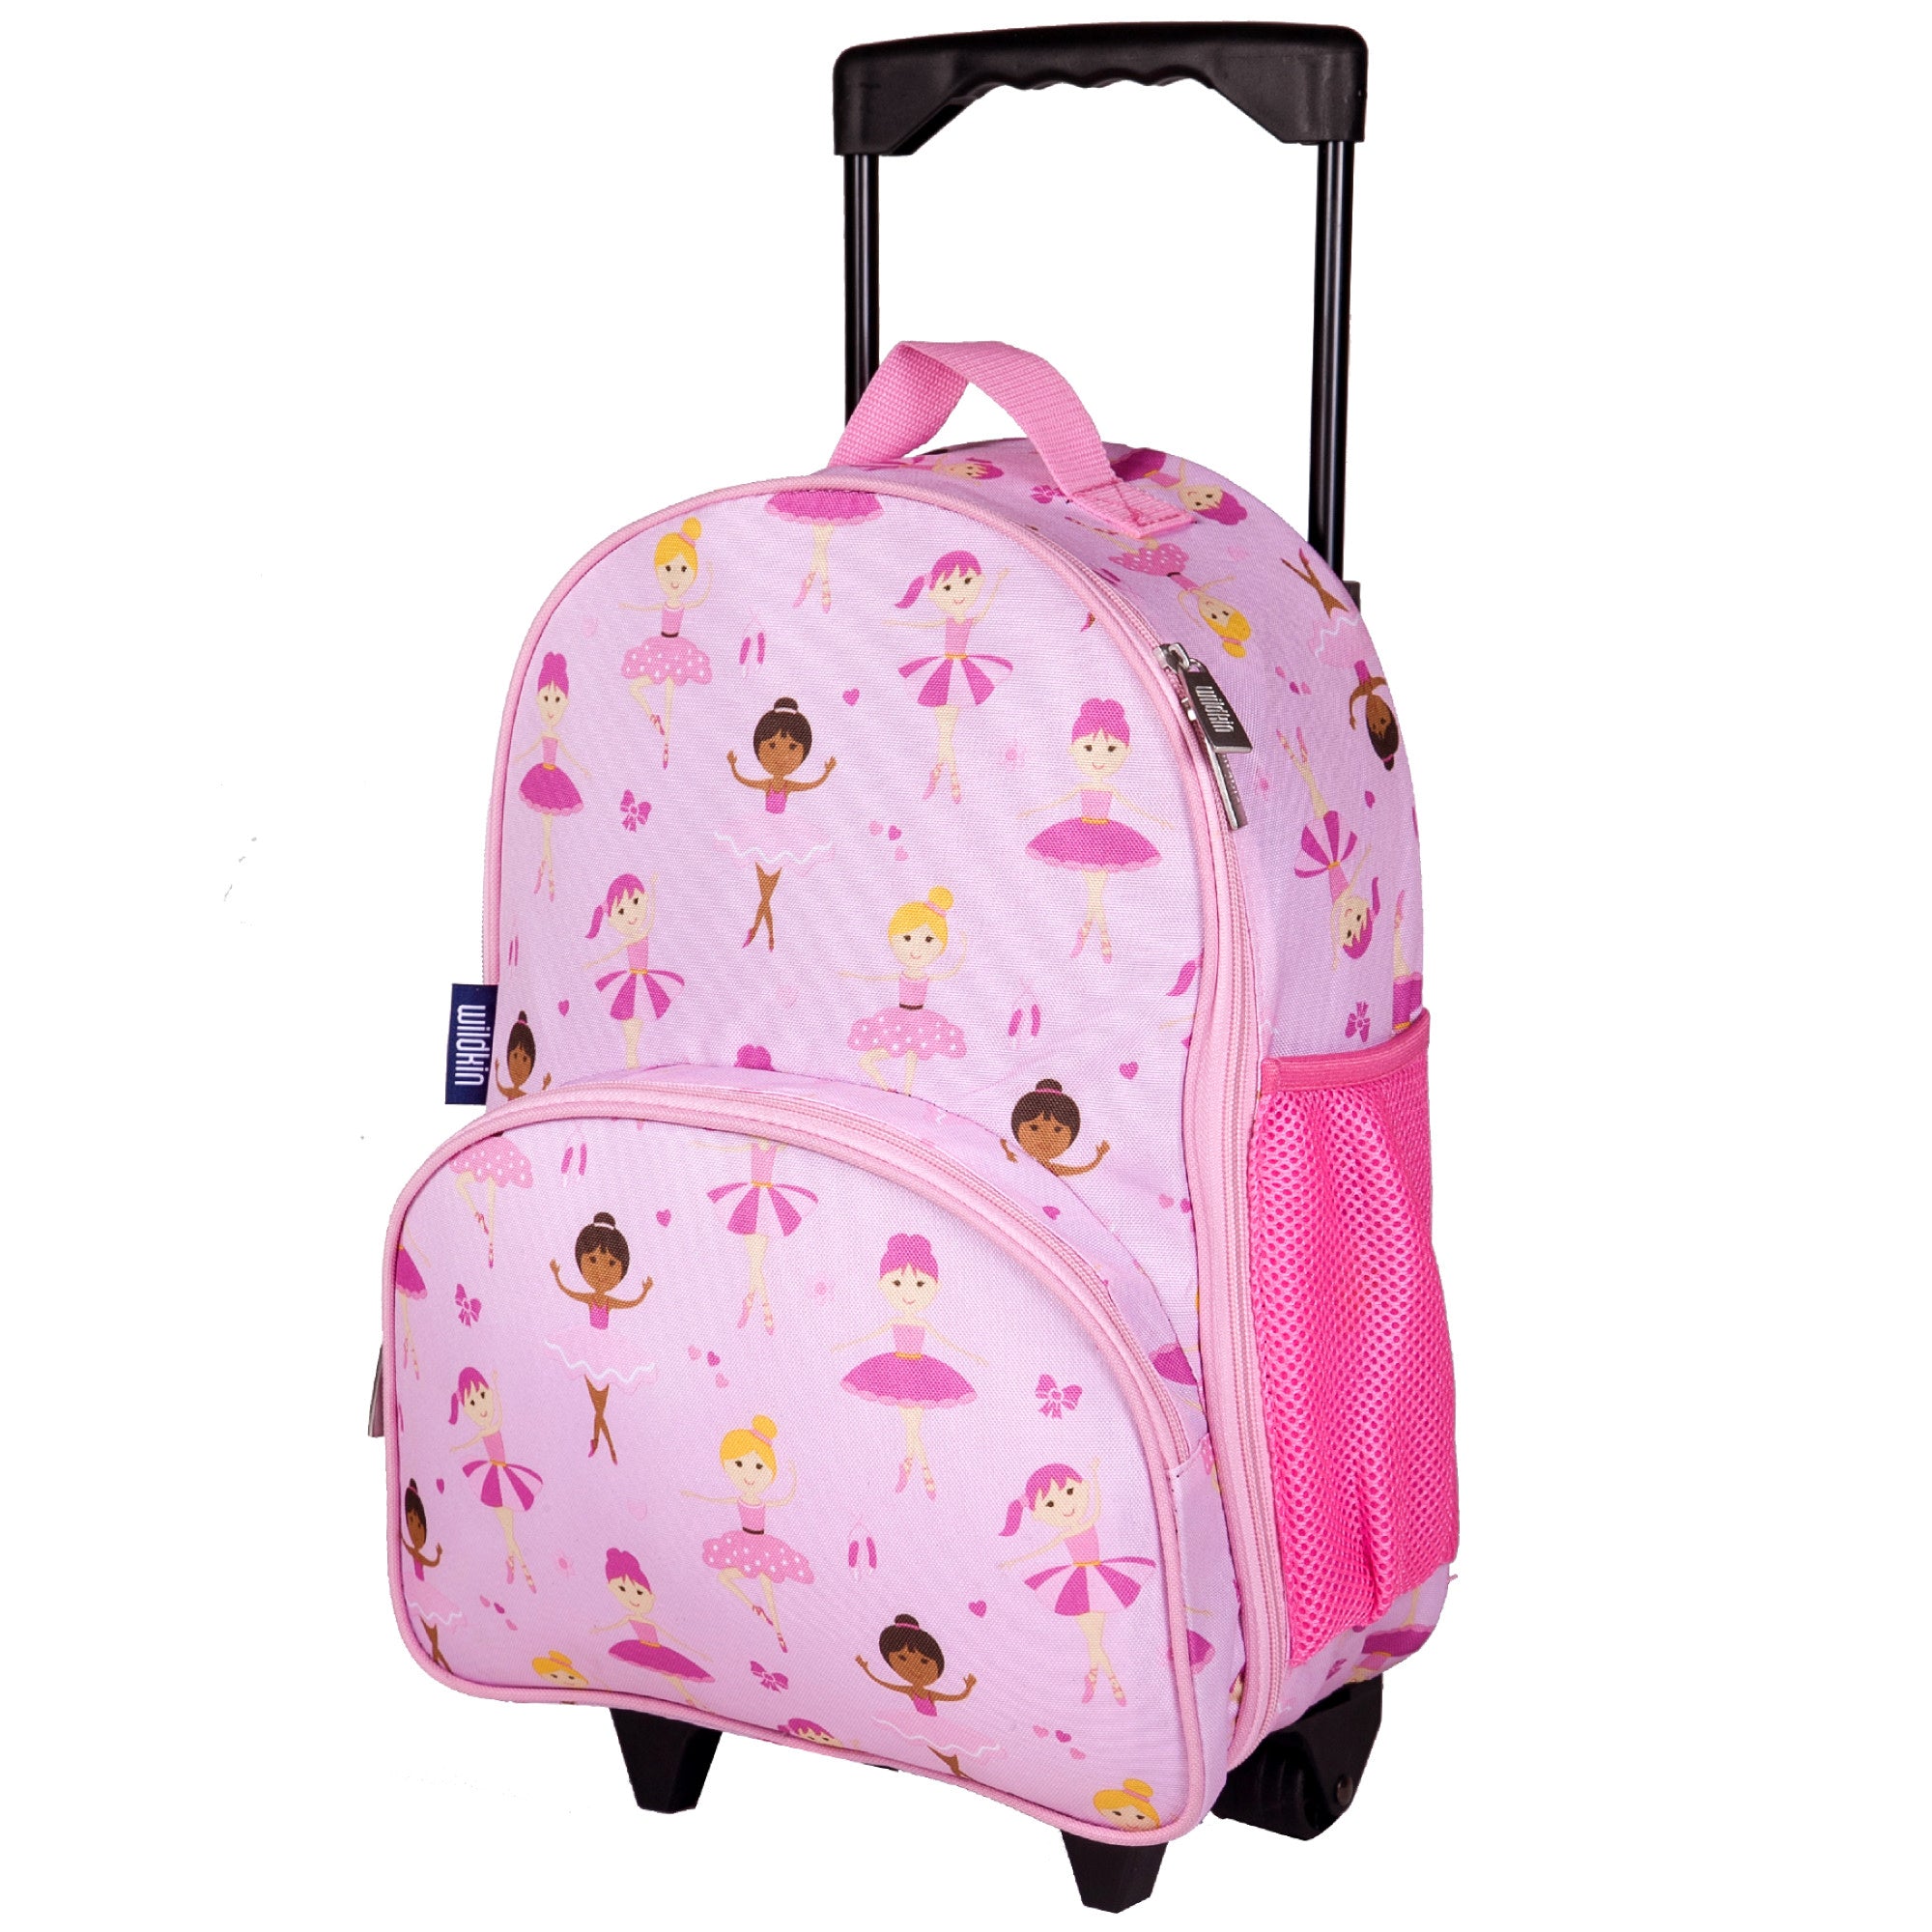 Kids Lovely Rolling Luggage Set Women Trolley Suitcase Girls Pink Cute  Spinner Brand Carry On Luggage Travel Bag Vs Cosmetic Bag - Rolling Luggage  - AliExpress